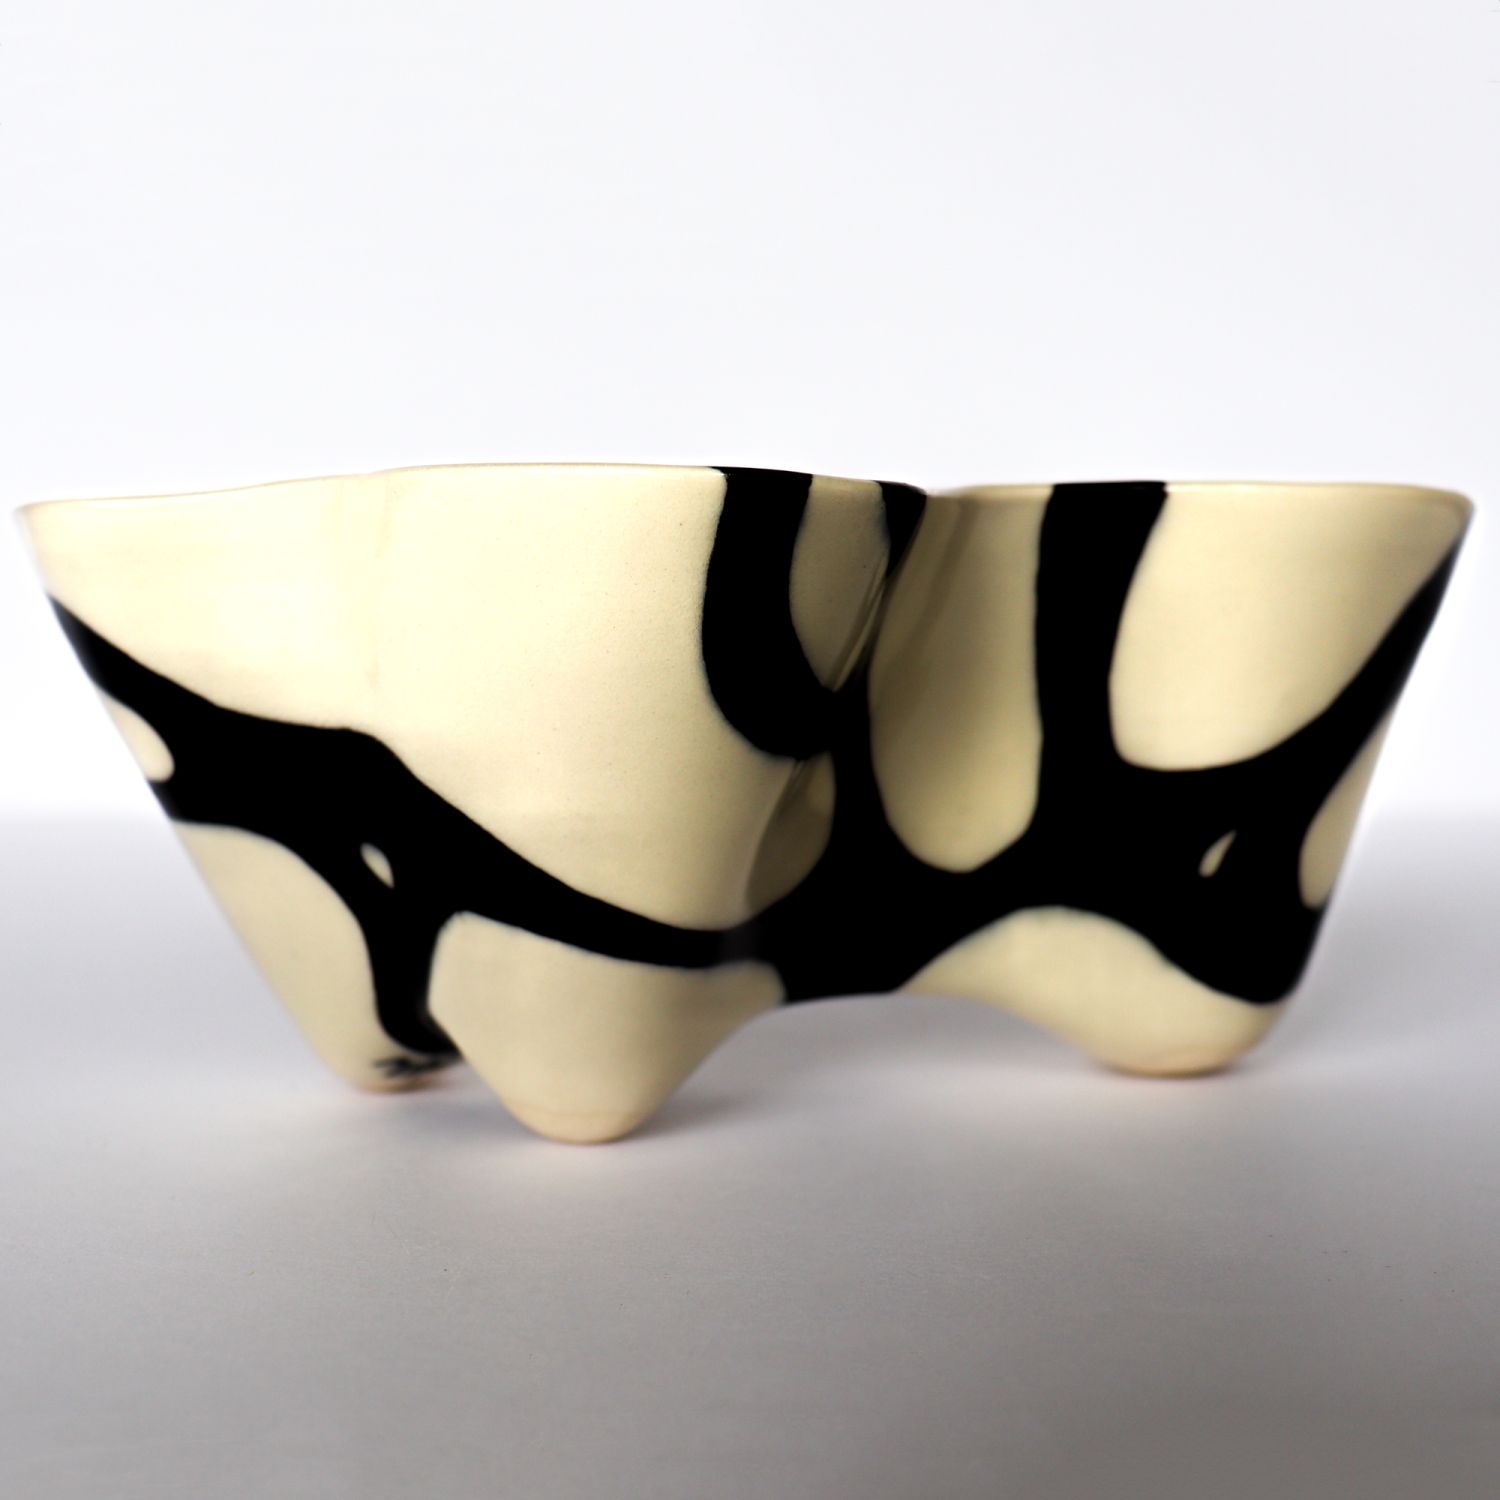 Alana Marcoccia: Interconnected Sculptural Bowl Product Image 9 of 12